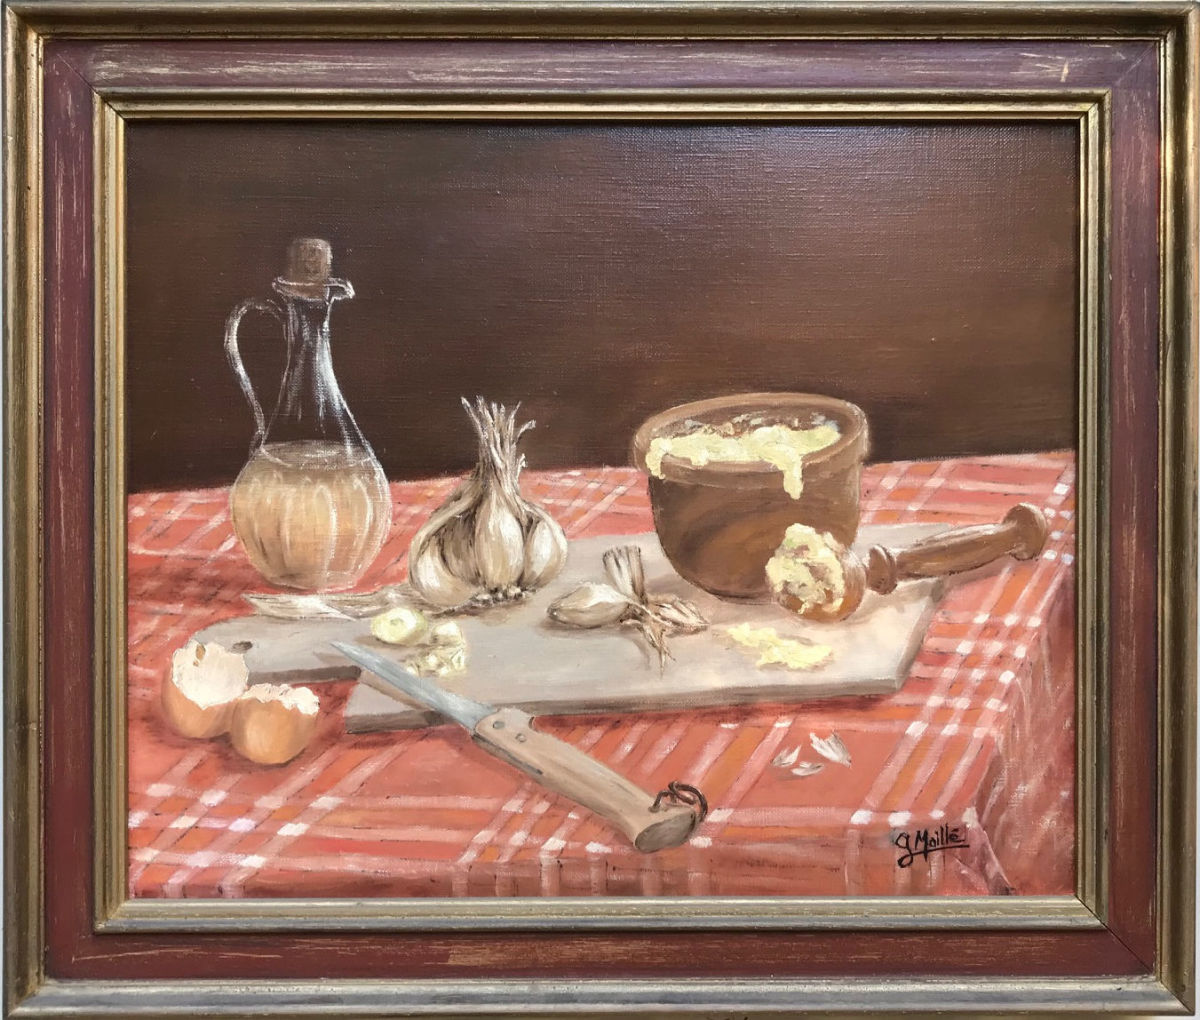 Aiolie by Gerard  Image: "Aioli" is a still life painting depicting the essential ingredients used to make "aioli" in the traditional French way.